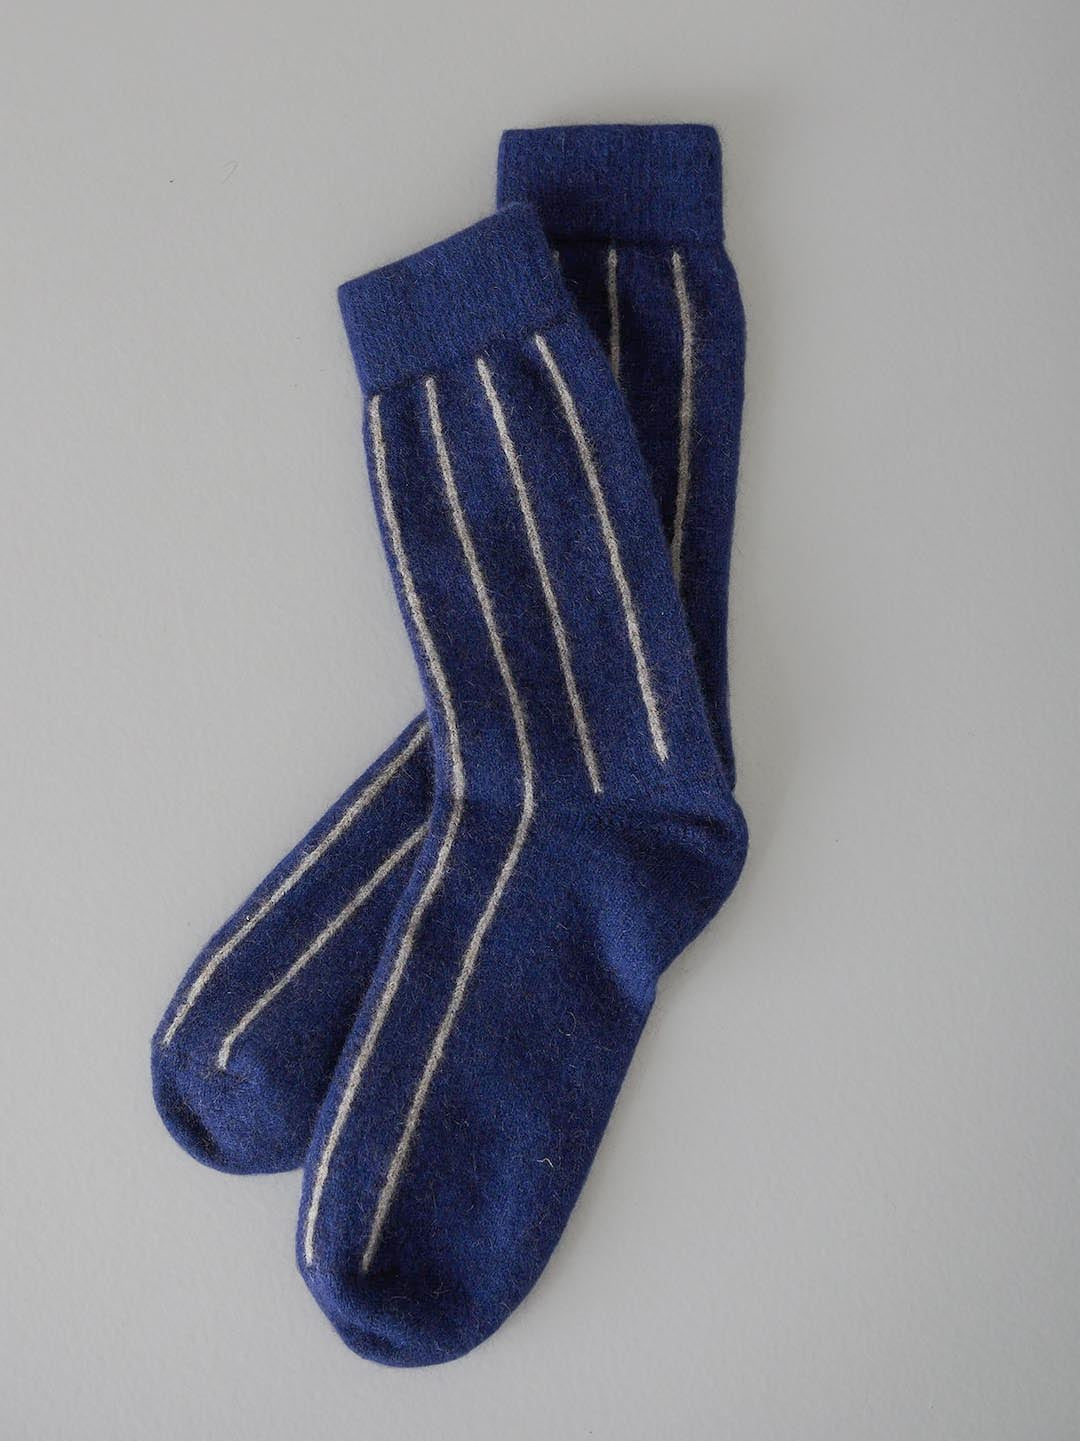 A pair of blue Francie Possum Merino Socks with white stripes laid flat on a light background.